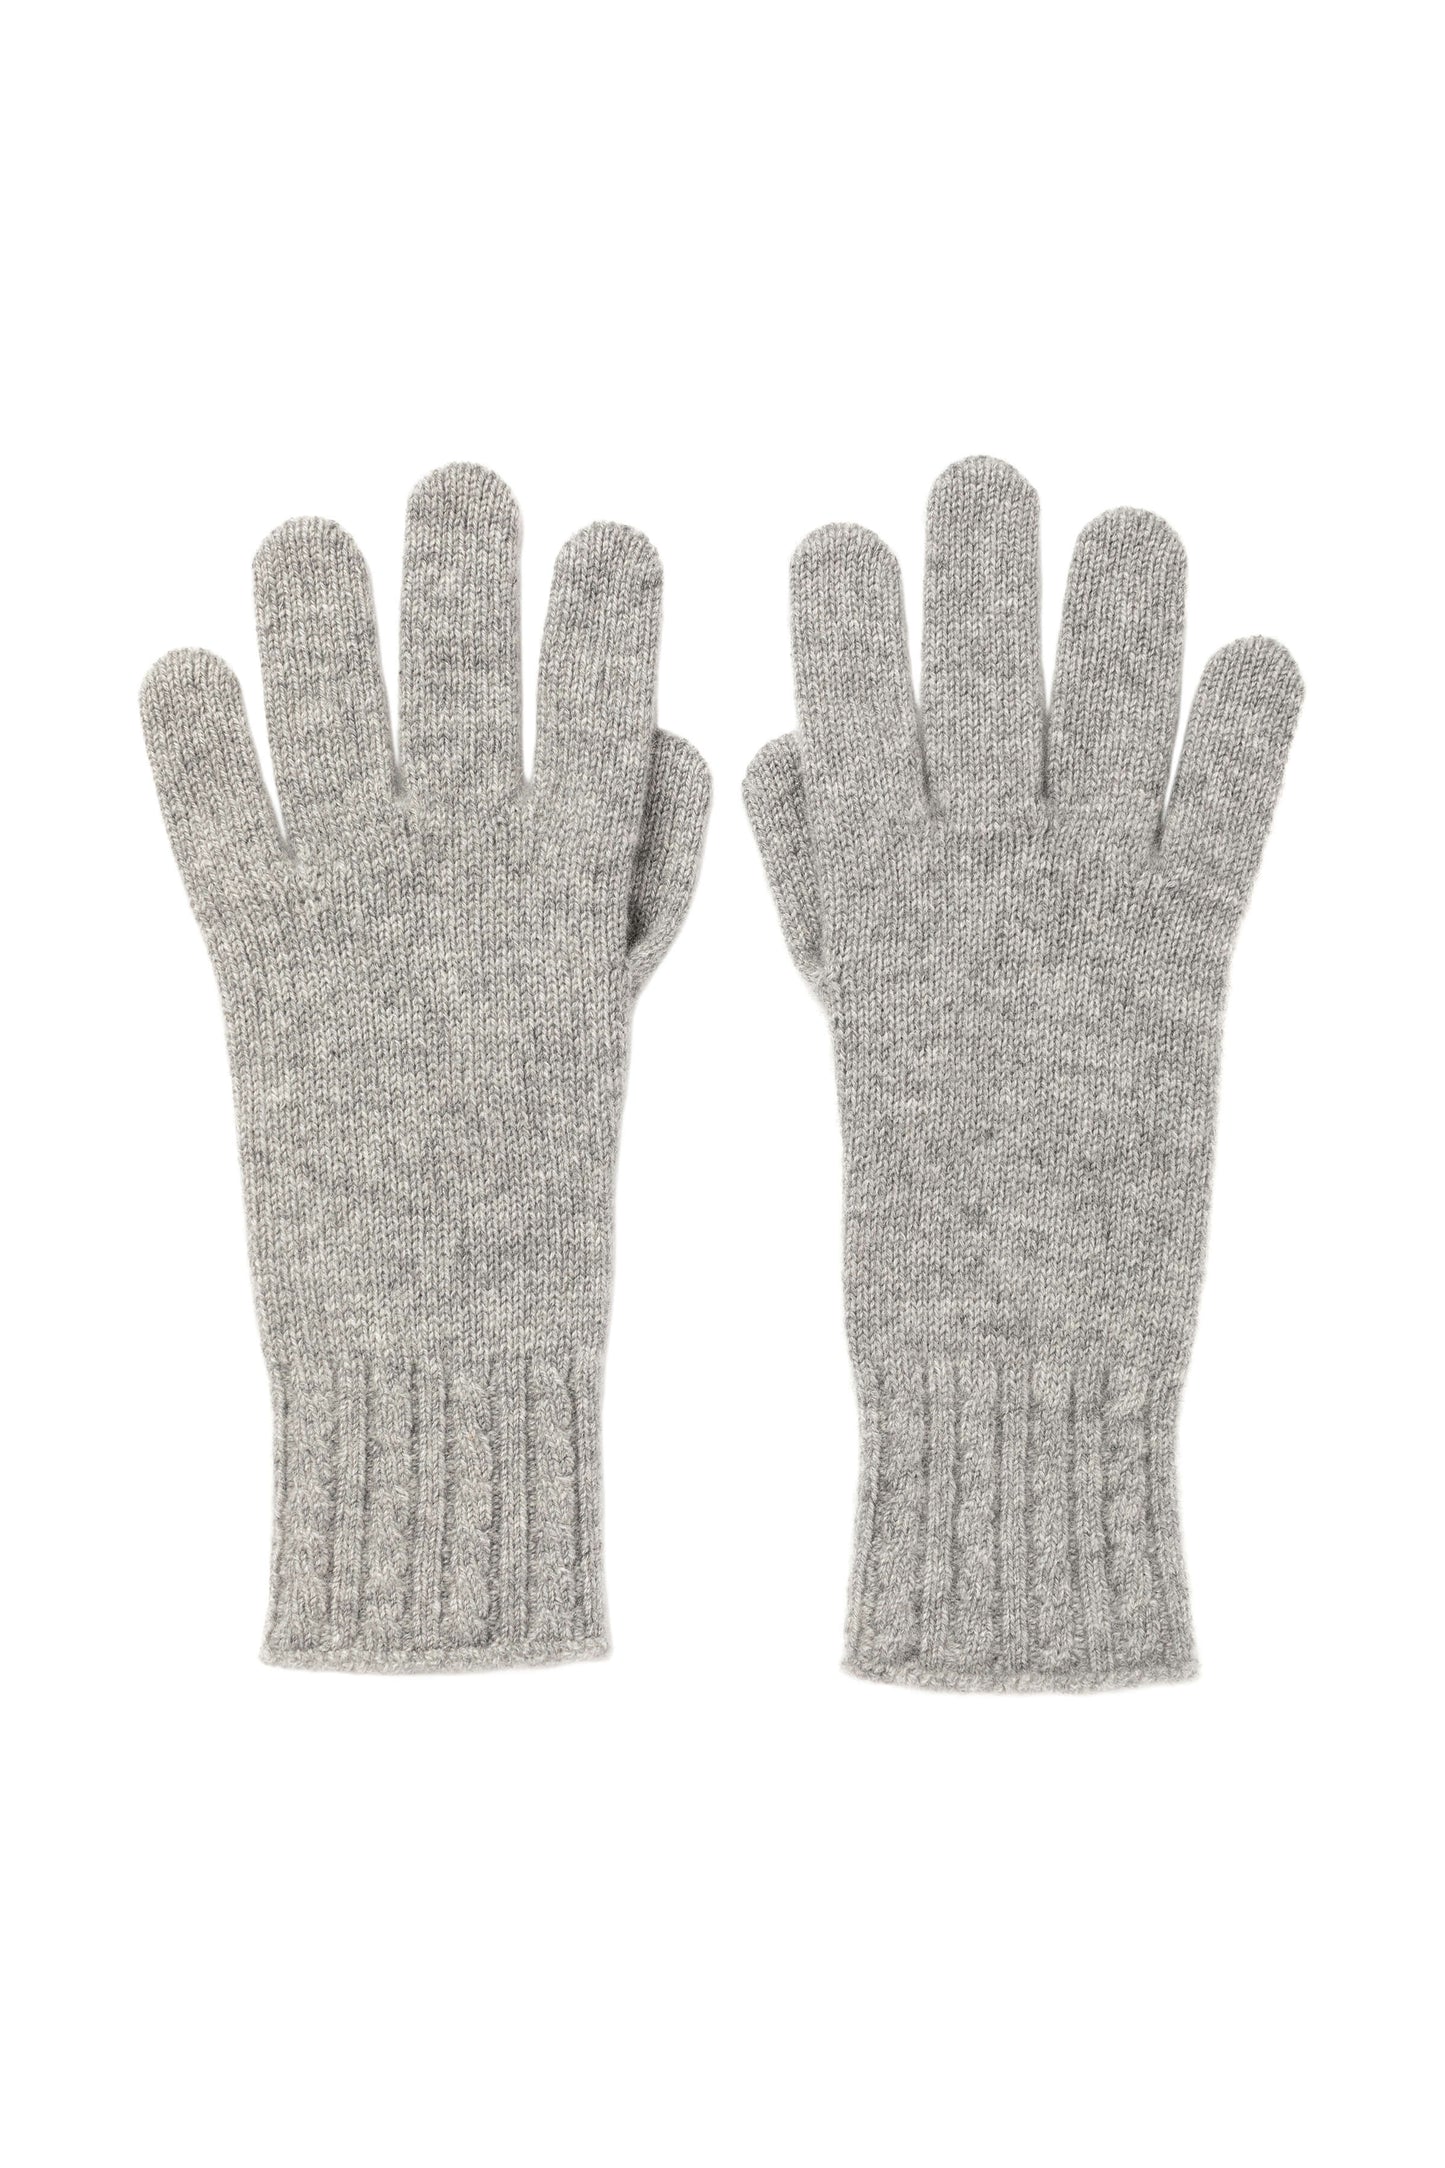 Johnstons of Elgin’s Light Grey Women's Cashmere Gloves with Cable Cuff on a white background HAE03245HA0308